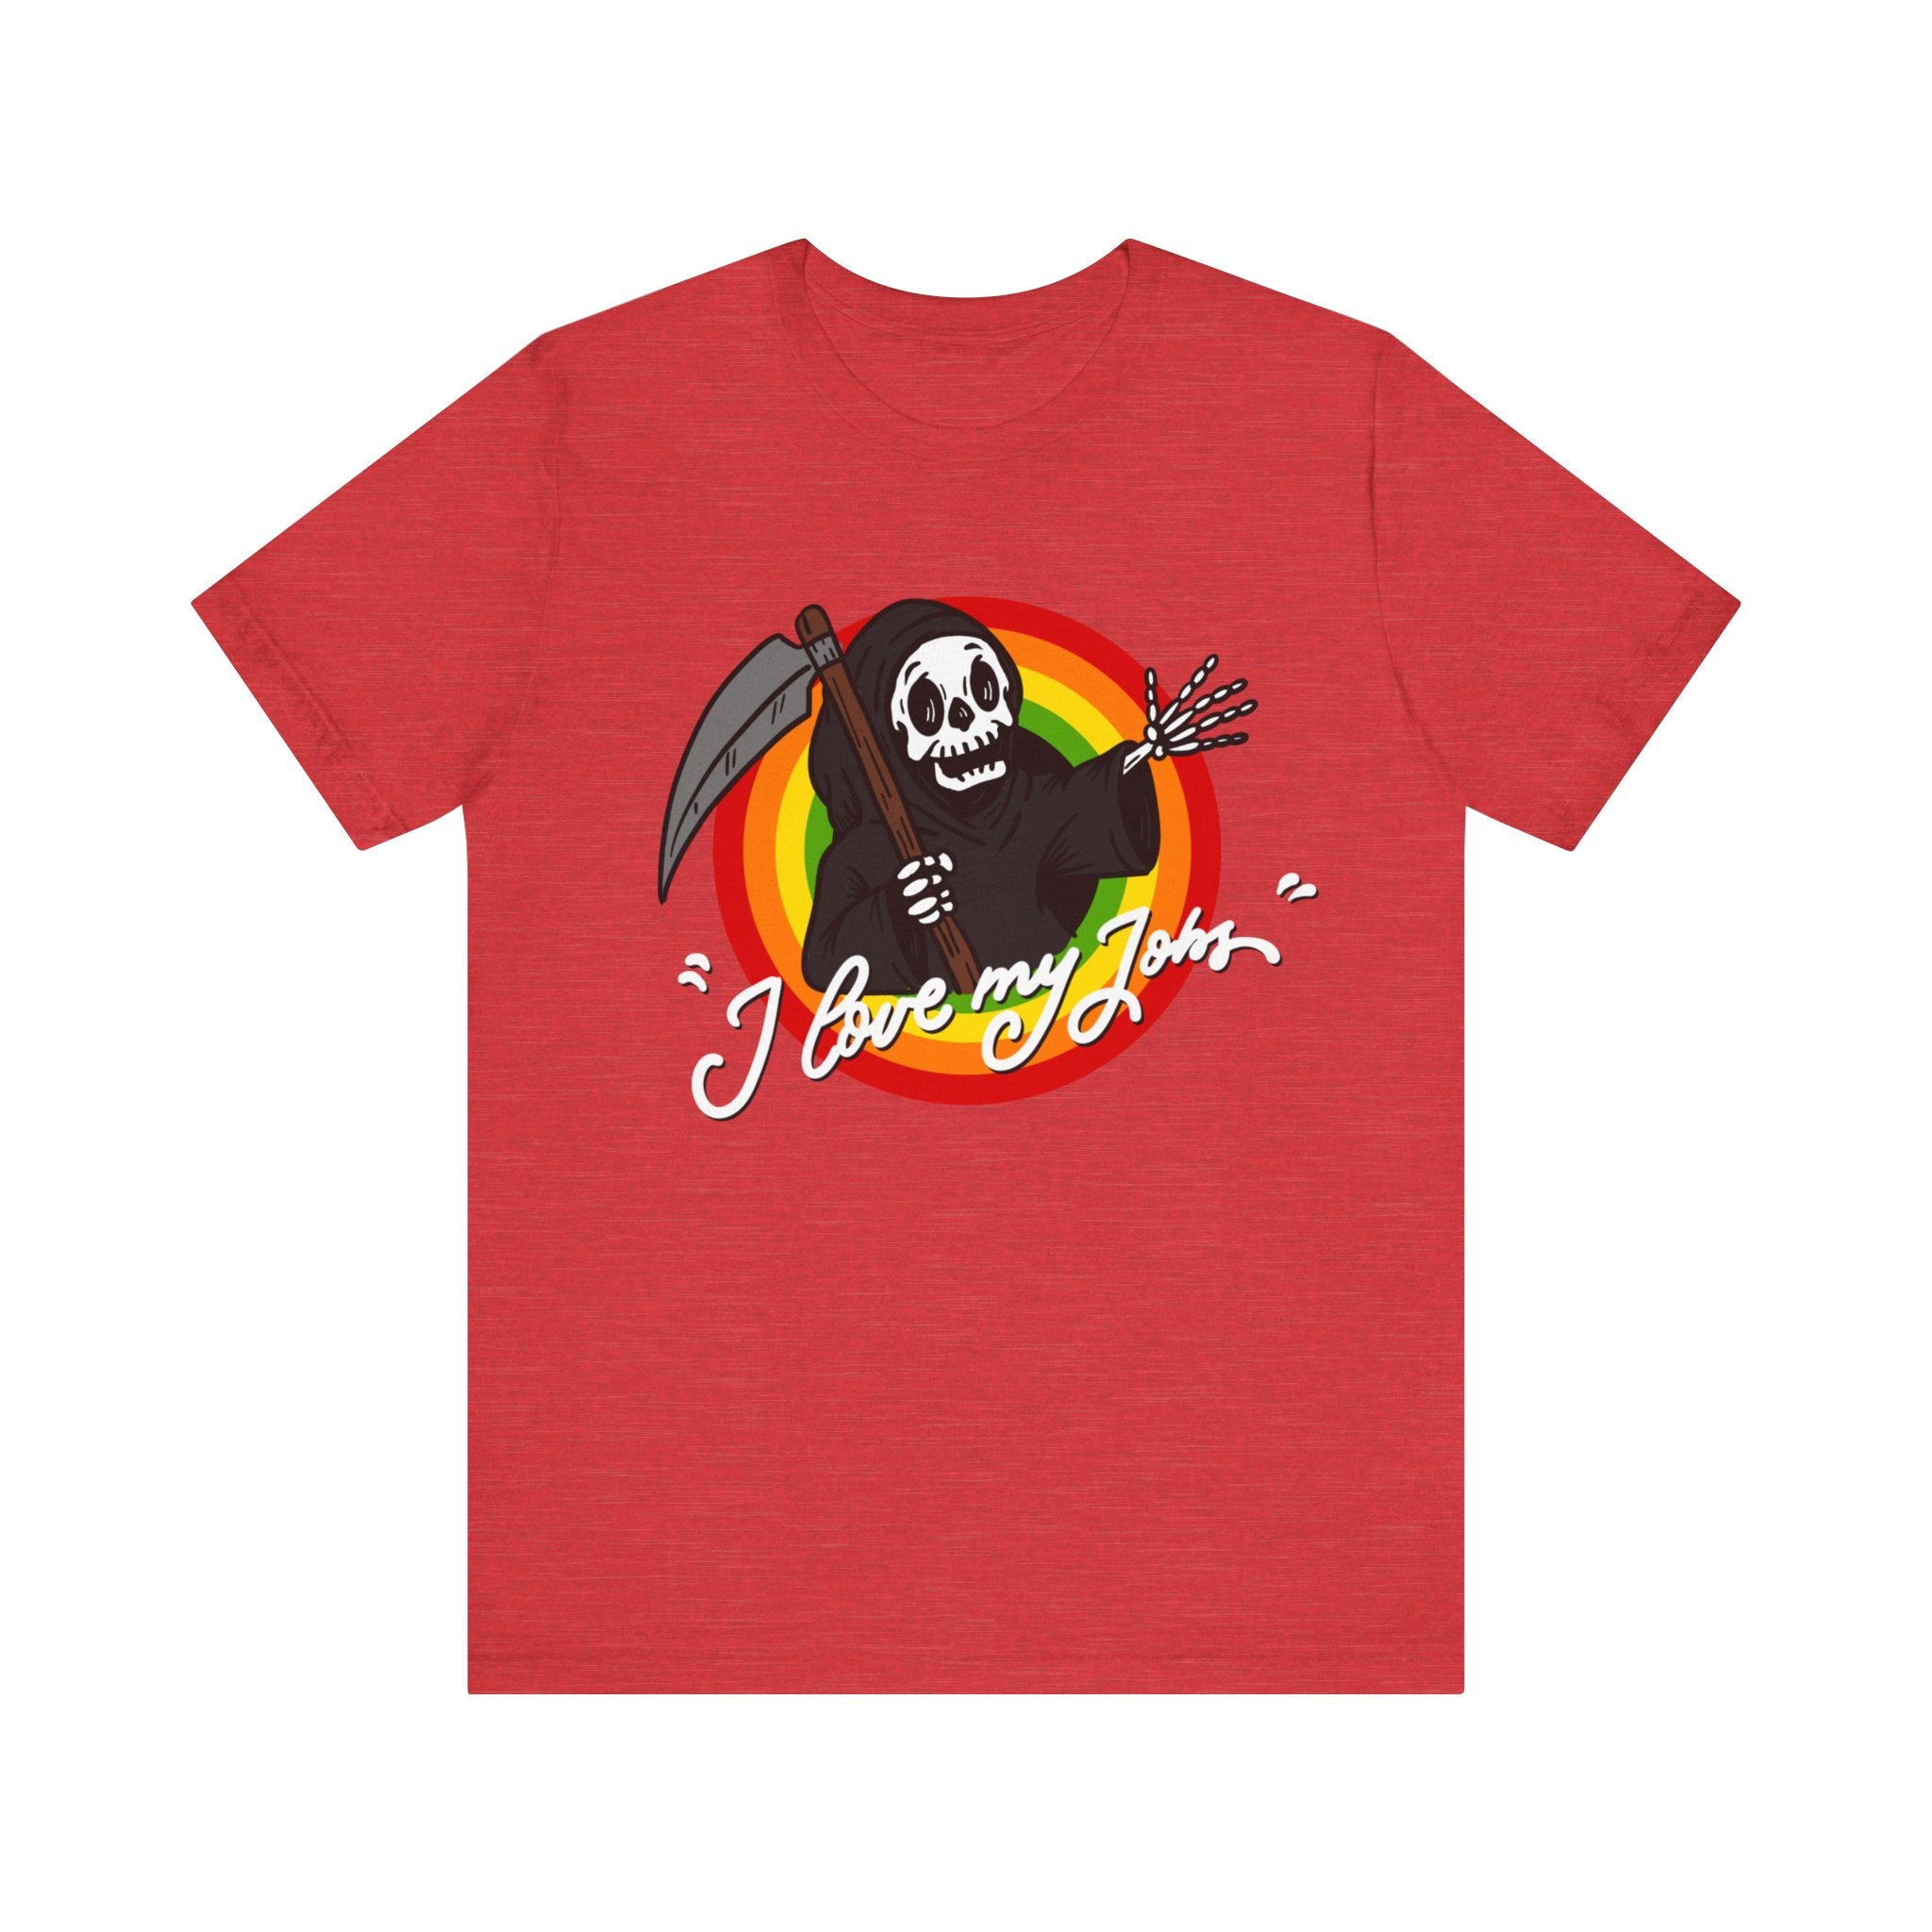 Red Love My Jobs T-shirt made of soft cotton, featuring a graphic of a smiling skeleton holding a scythe and a pencil, with the phrase "Love My Job" in playful script.